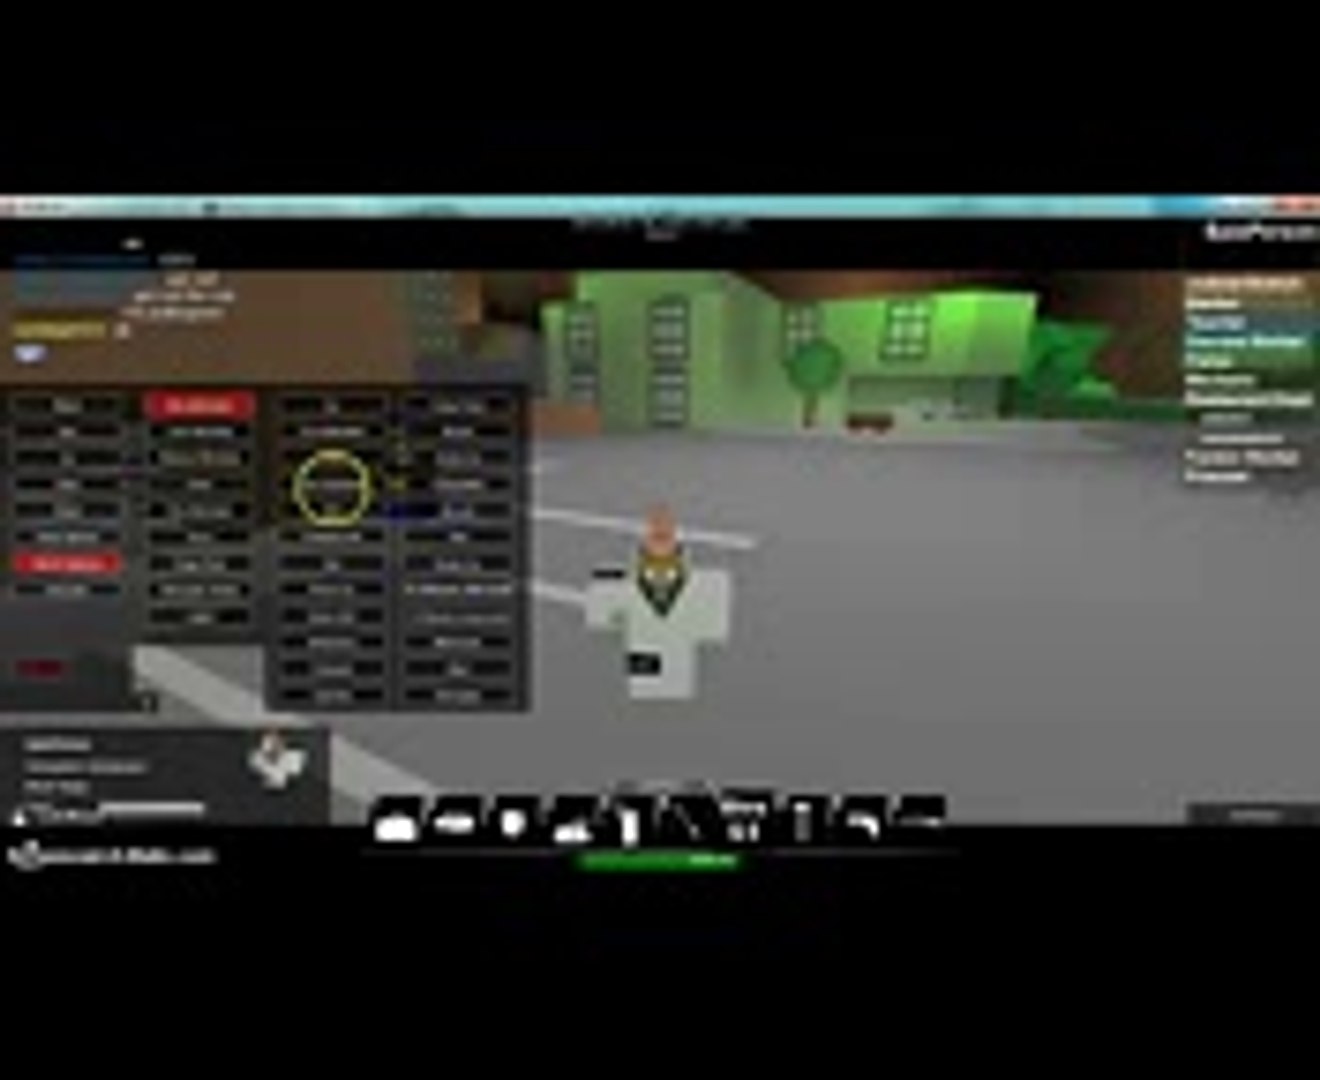 Roblox Cheat Hack Updated On August 2014 Video Dailymotion - robux medifire roblox robux cheat engine